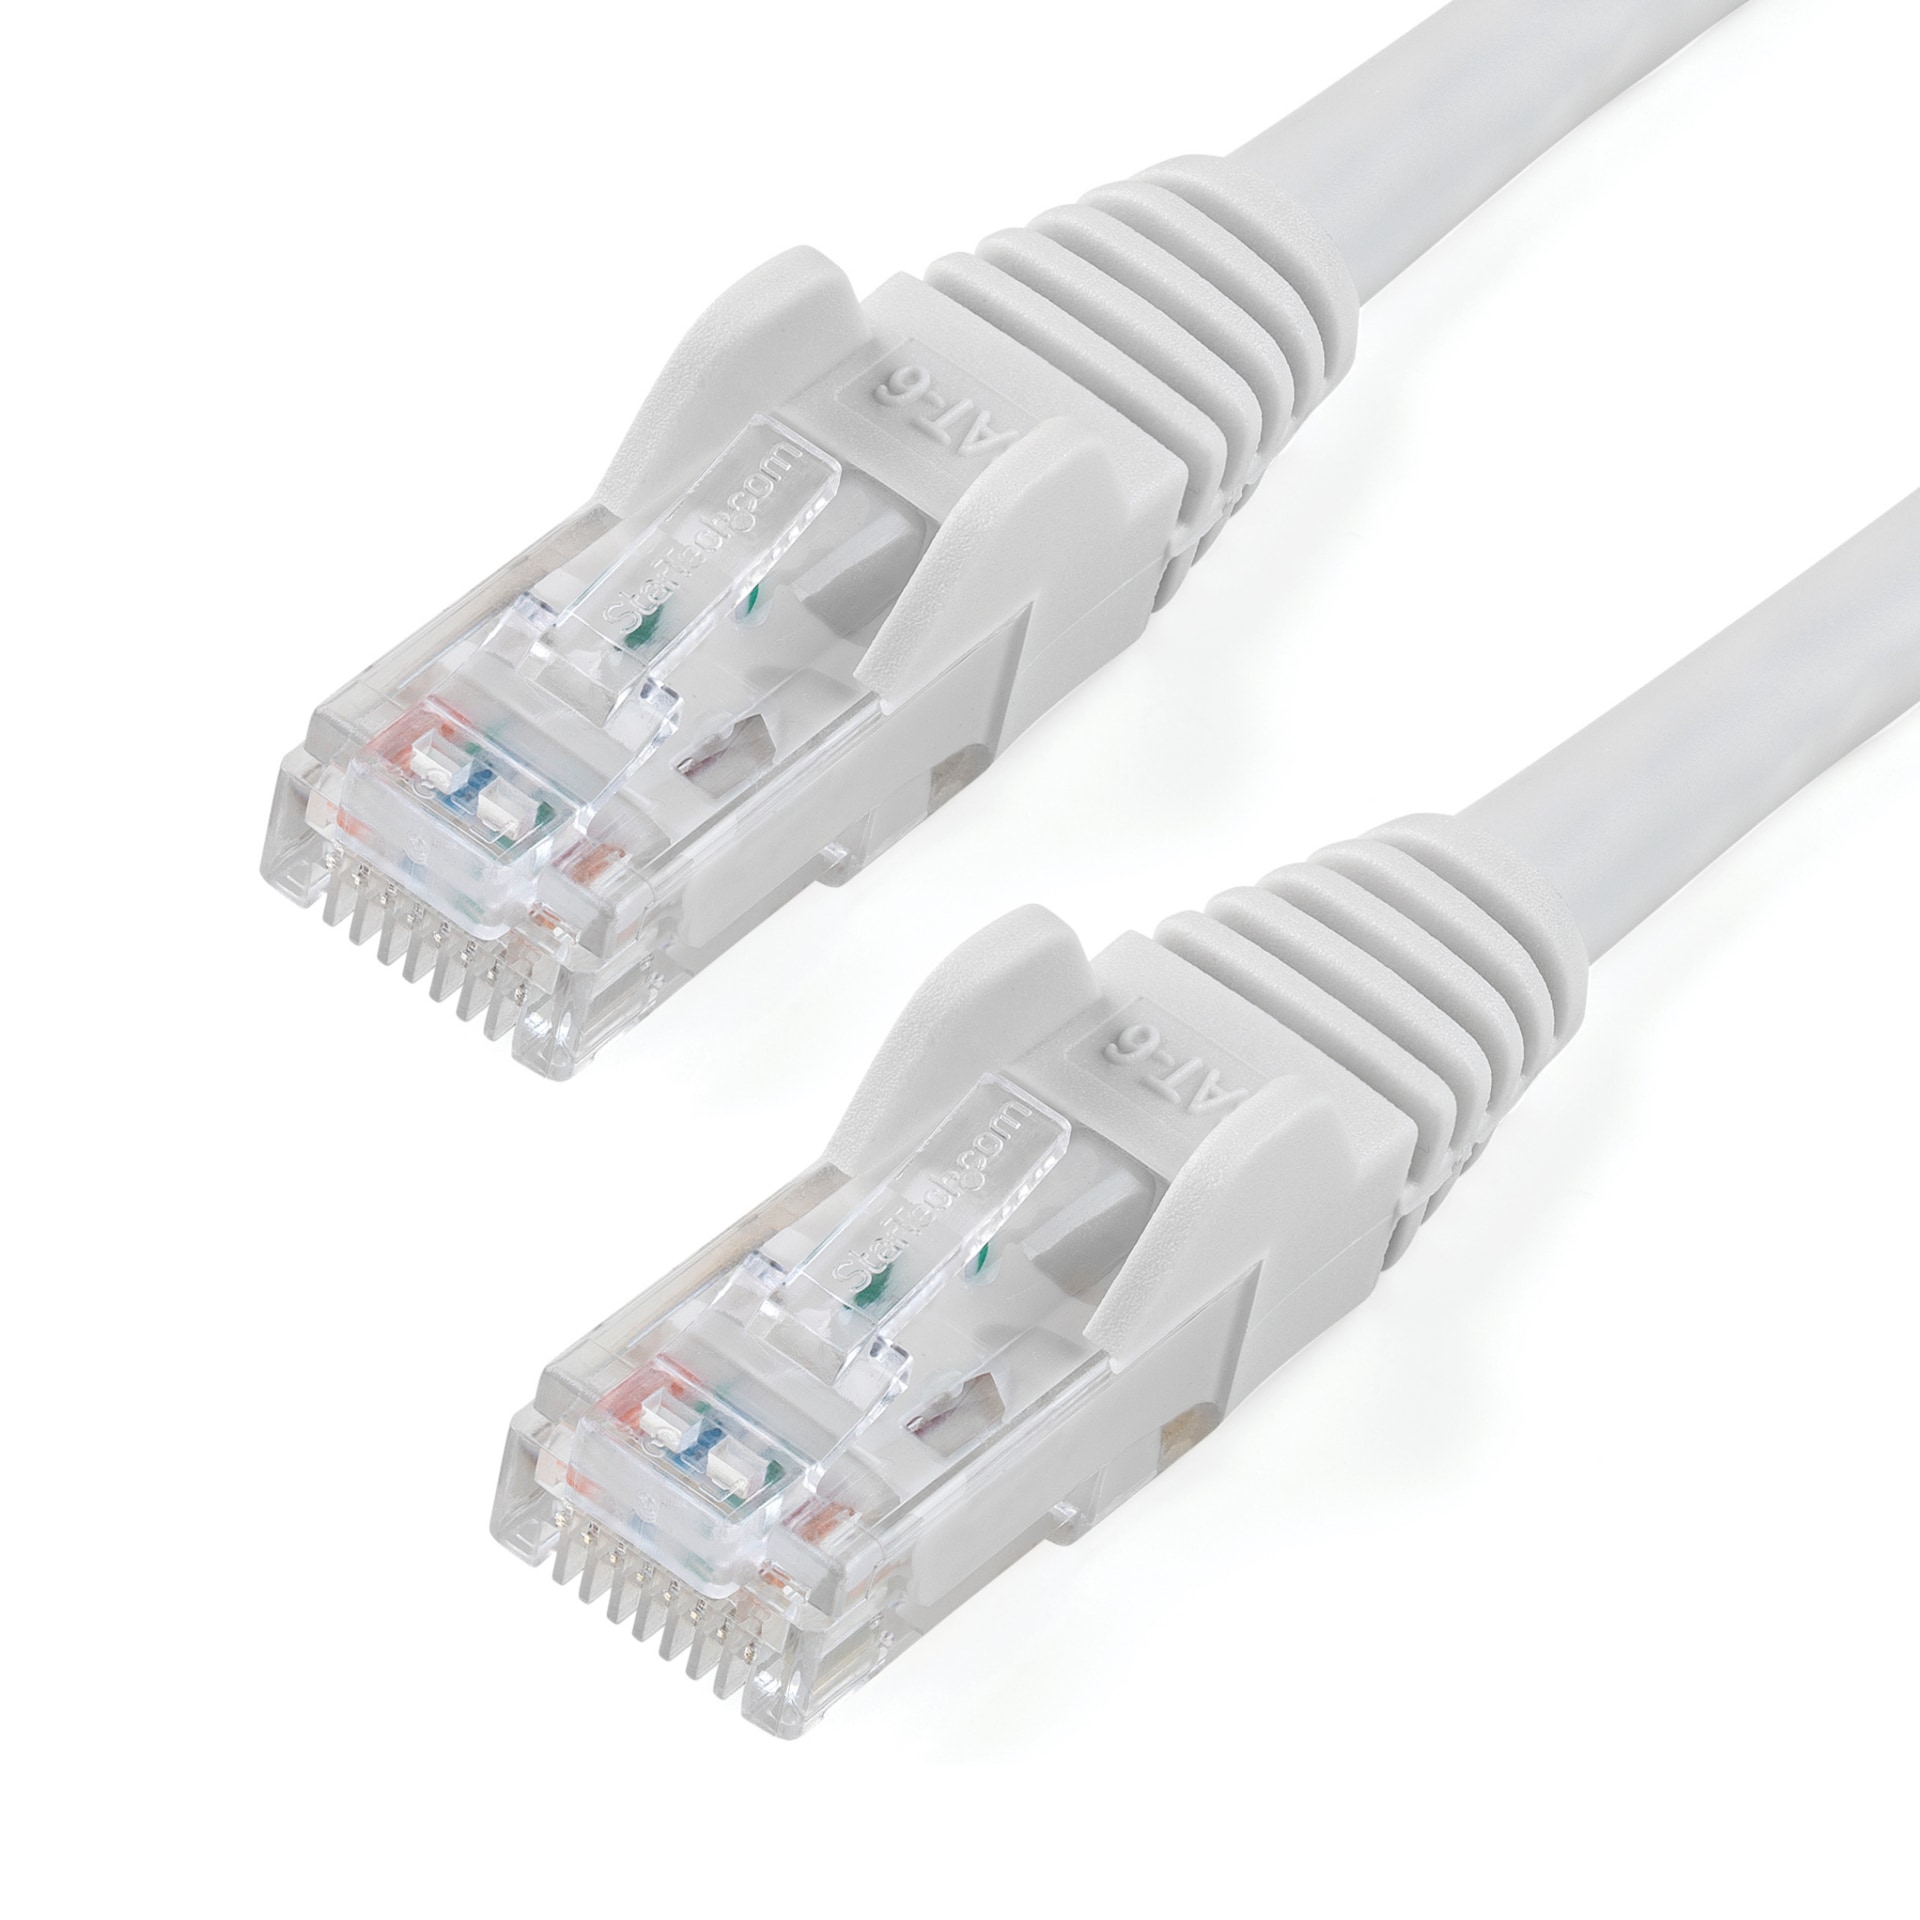 StarTech.com 6ft CAT6 Ethernet Cable White Snagless UTP CAT 6 Gigabit Cord/Wire 100W PoE 650MHz